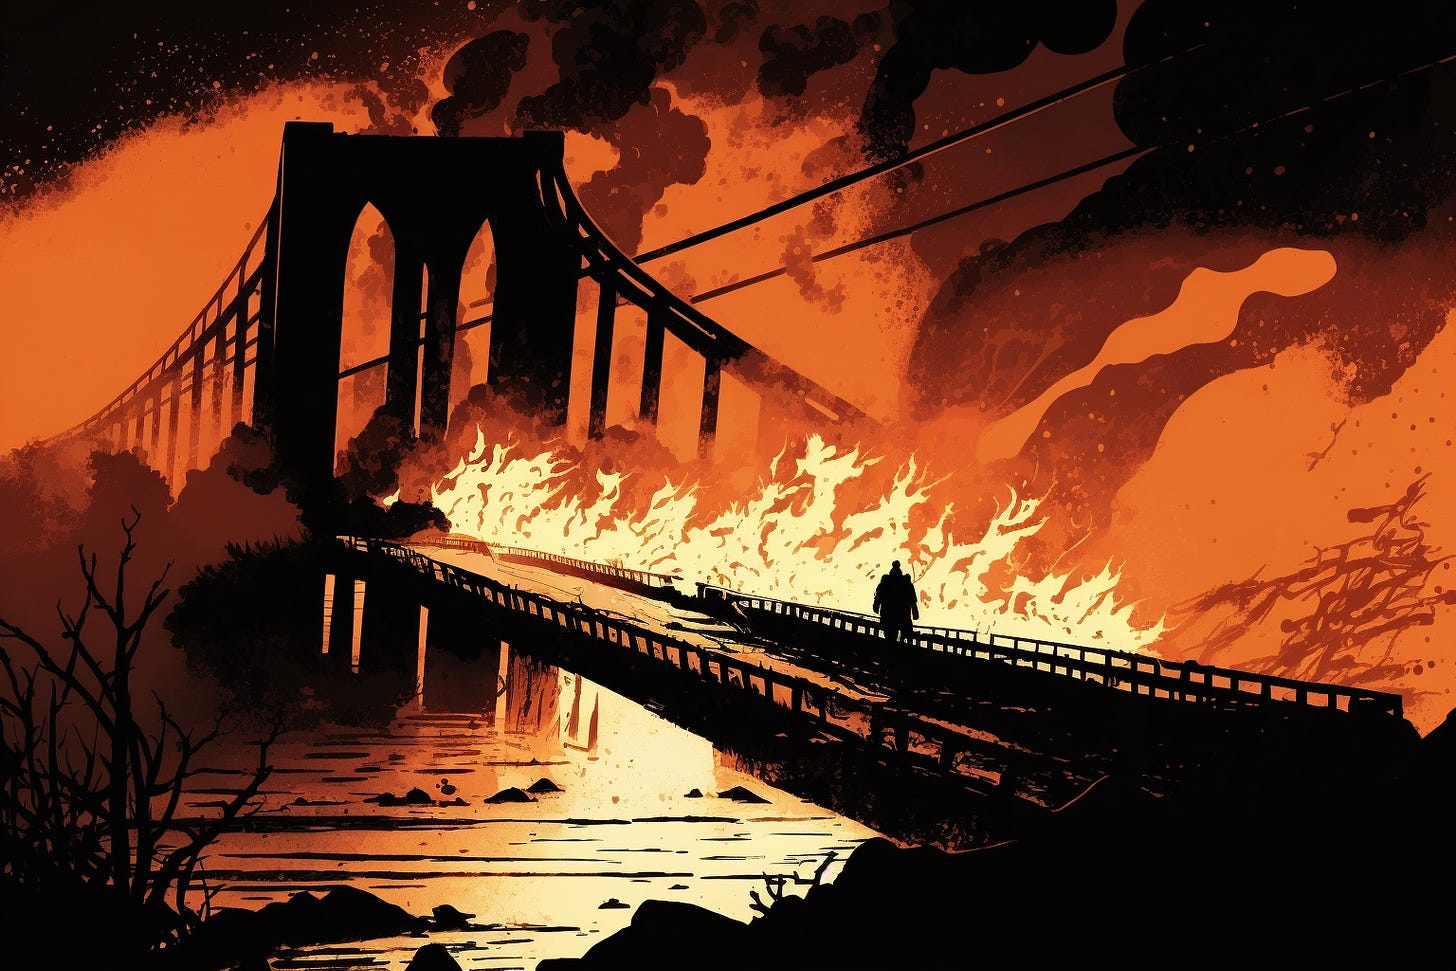 A large burning bridge with a person staring at the flames